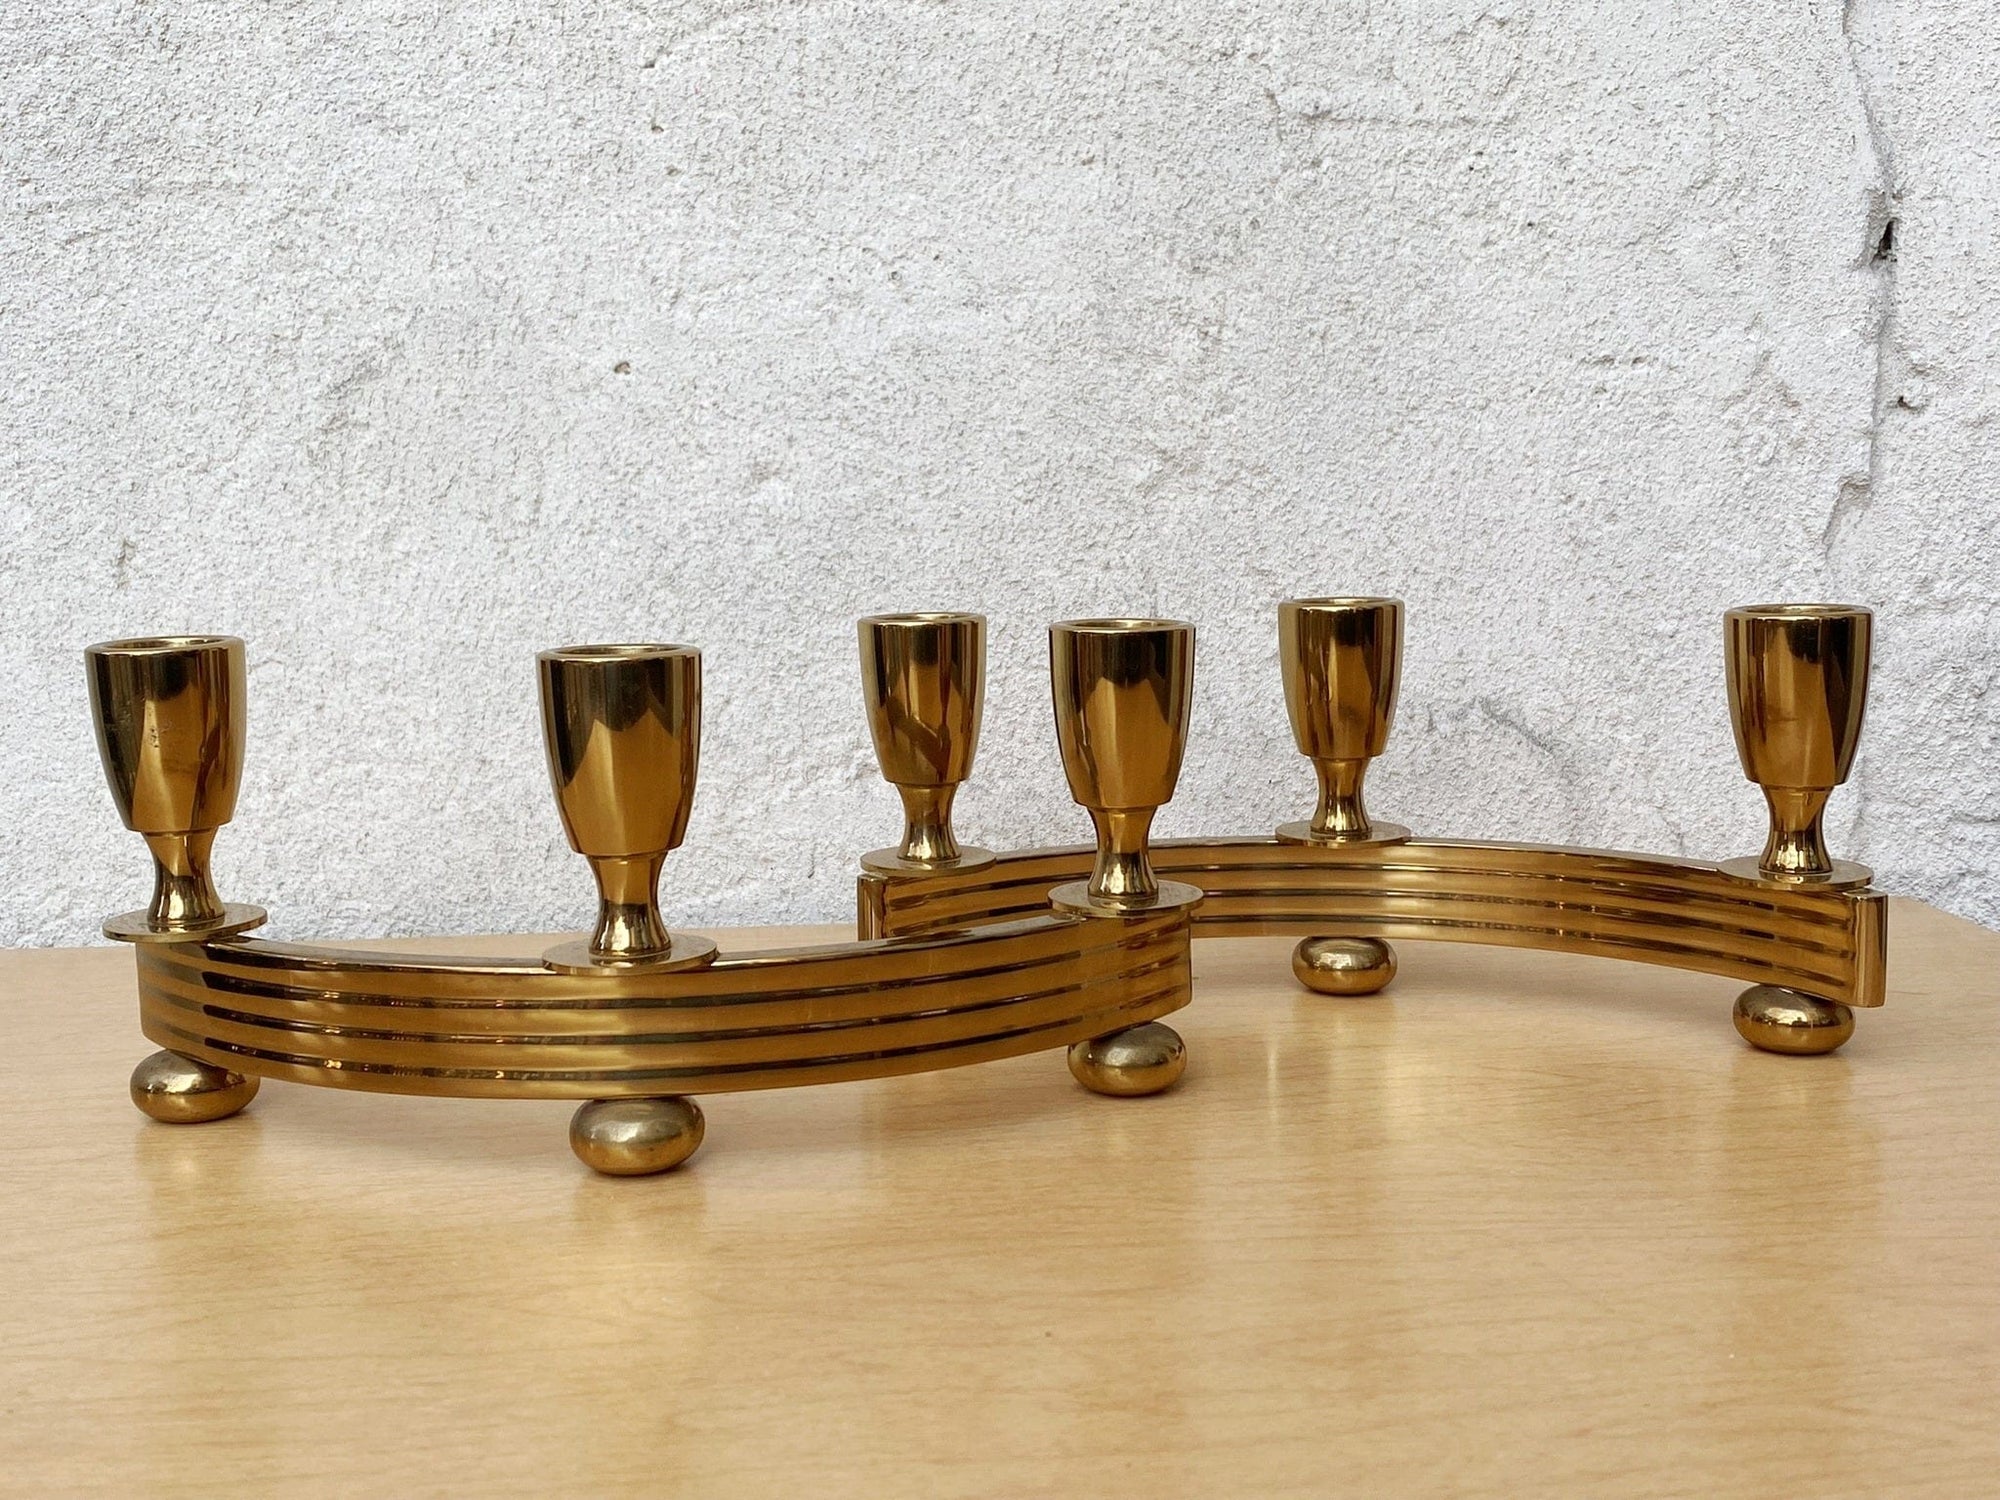 I Like Mike's Mid Century Modern candle holders Pair Brass Deco Candlelabra Candle Stick Holders by Dirilyte #1